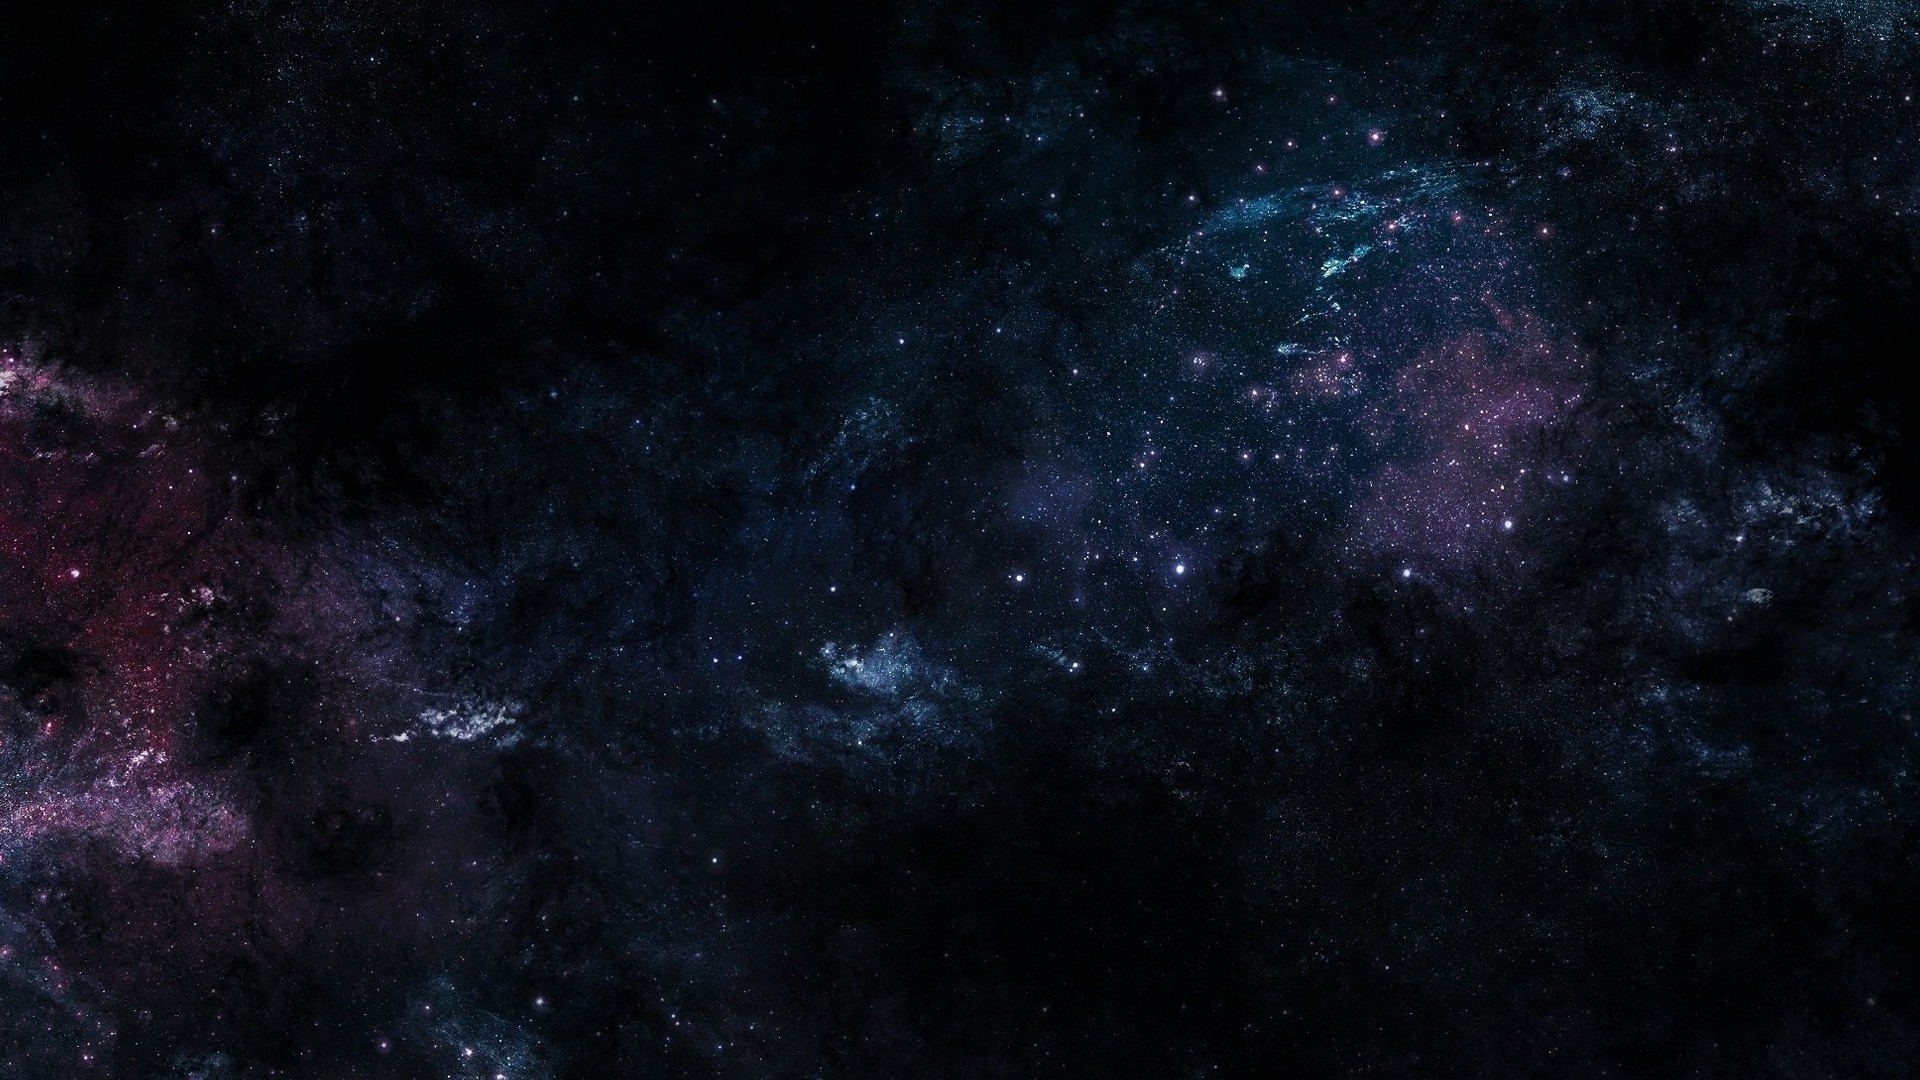 1920x1080 media.moddb.com images games 1 34 33057  Hd_Wallpaper_Space_Stars_2014_Free_15_HD_Wallpapers.jpg | Filling the void  | Pinterest | Star wallpaper, Hd images ...